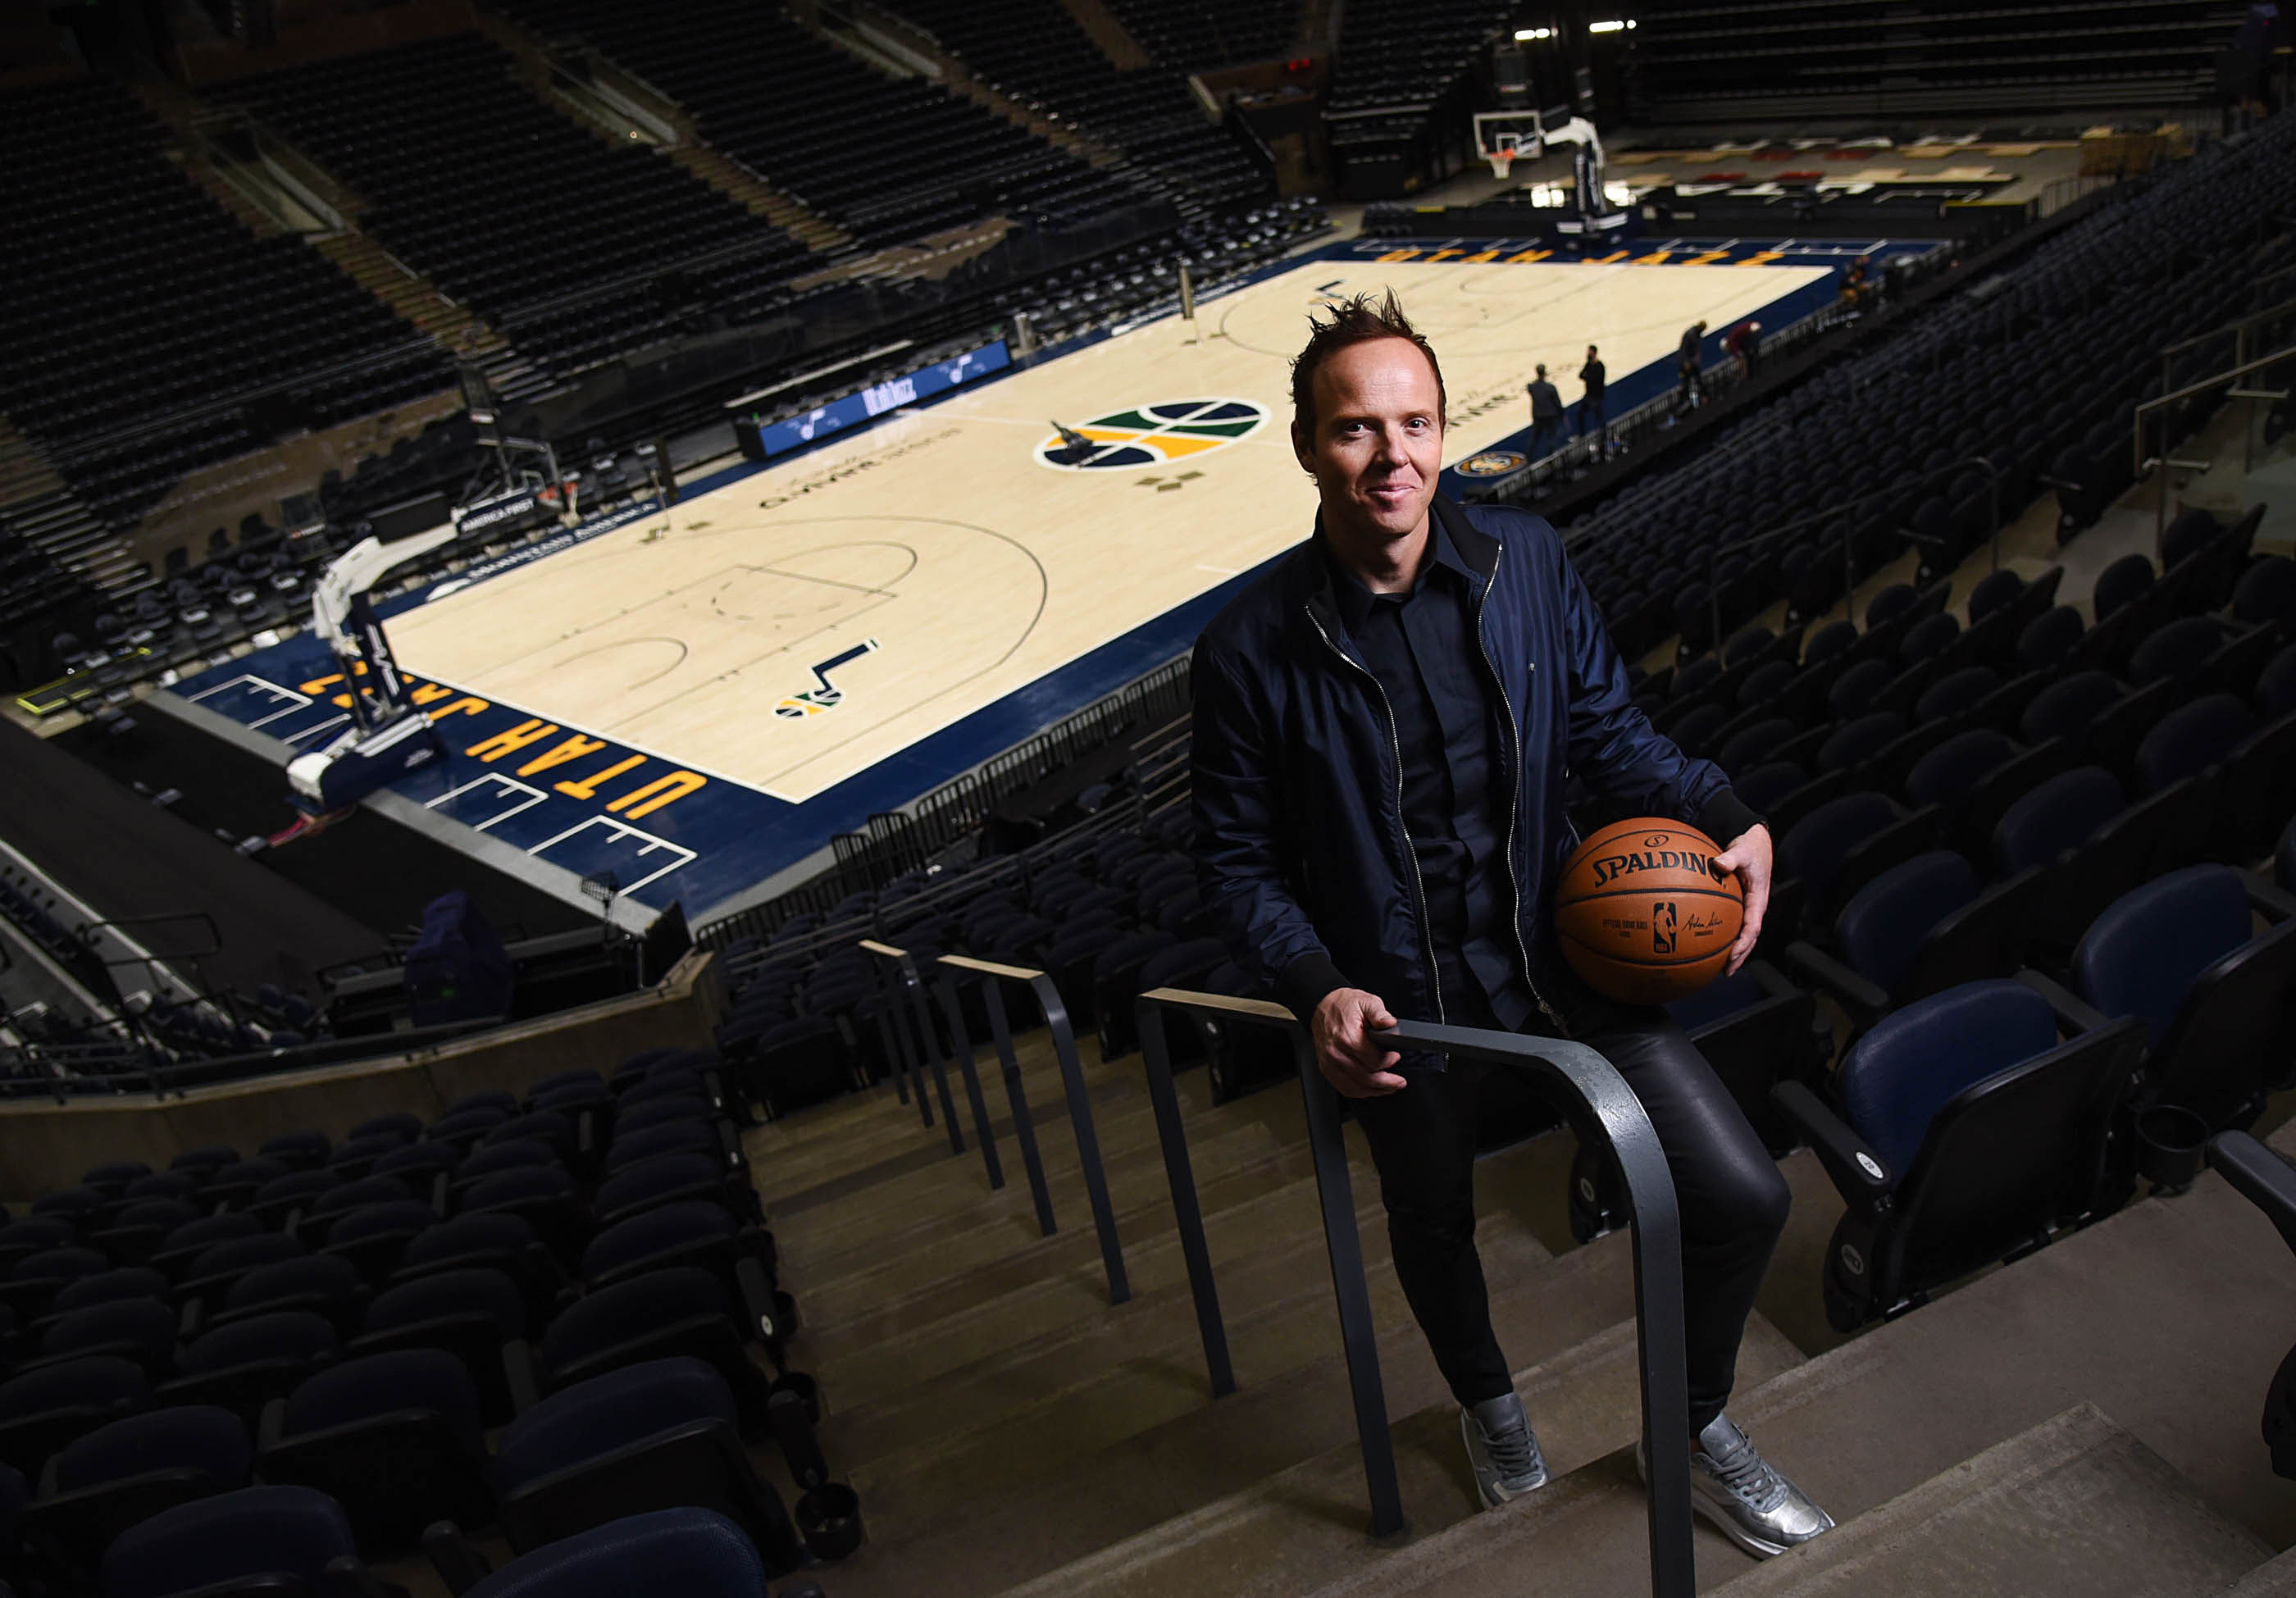 Utah Jazz owners move team ownership to a trust, keeping franchise